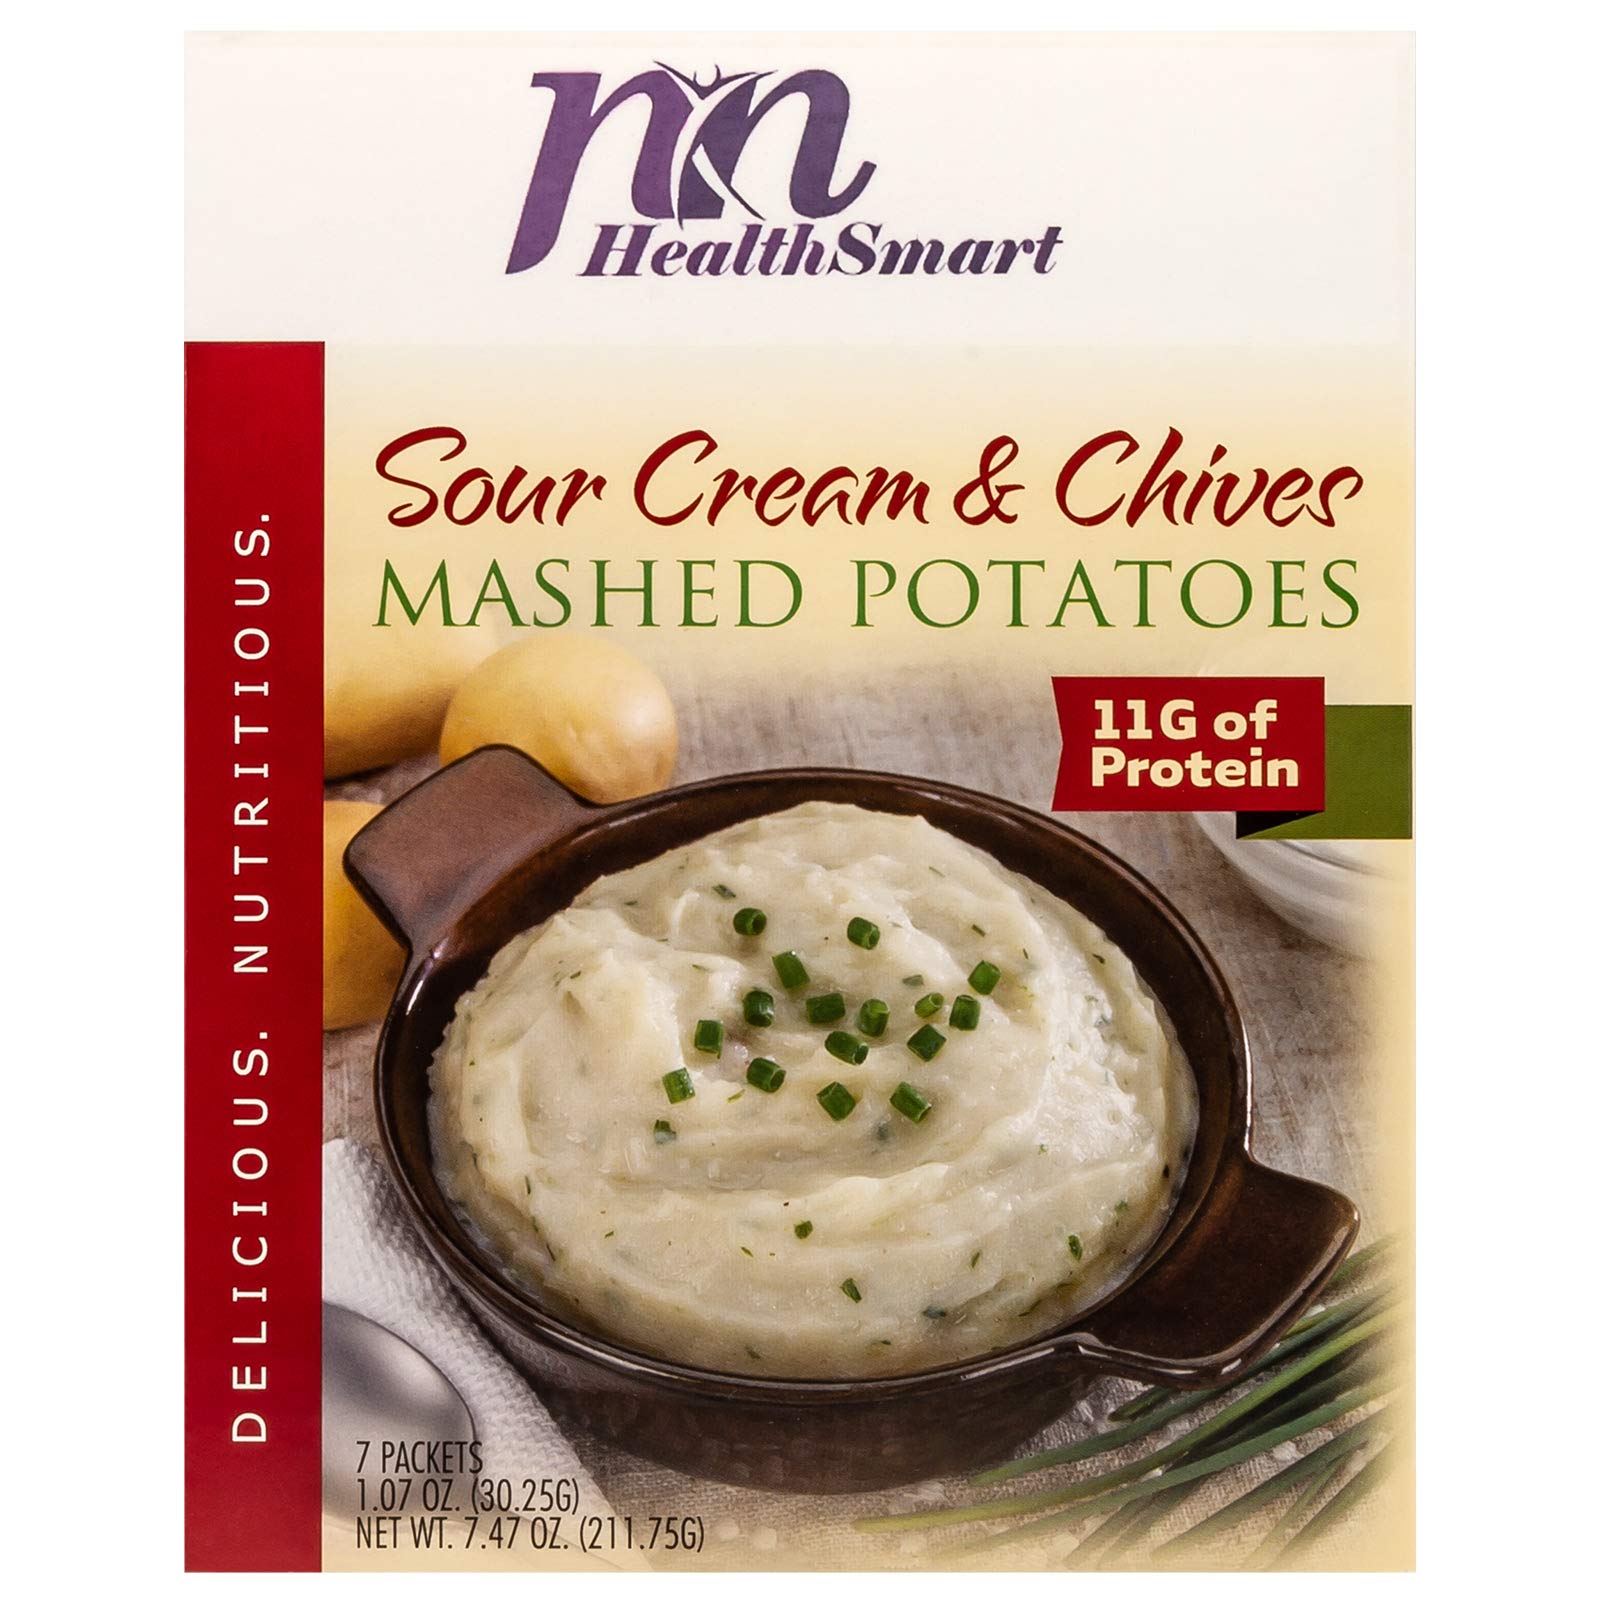 HealthSmart High Protein Instant Creamy Sour Cream & Chive Mashed Potatoes | Low Carb, Low Fat, Low Calorie Mashed Potatoes - Gluten-Free, Quick & Easy Meal | Portion Controlled Servings, 7 Count Box